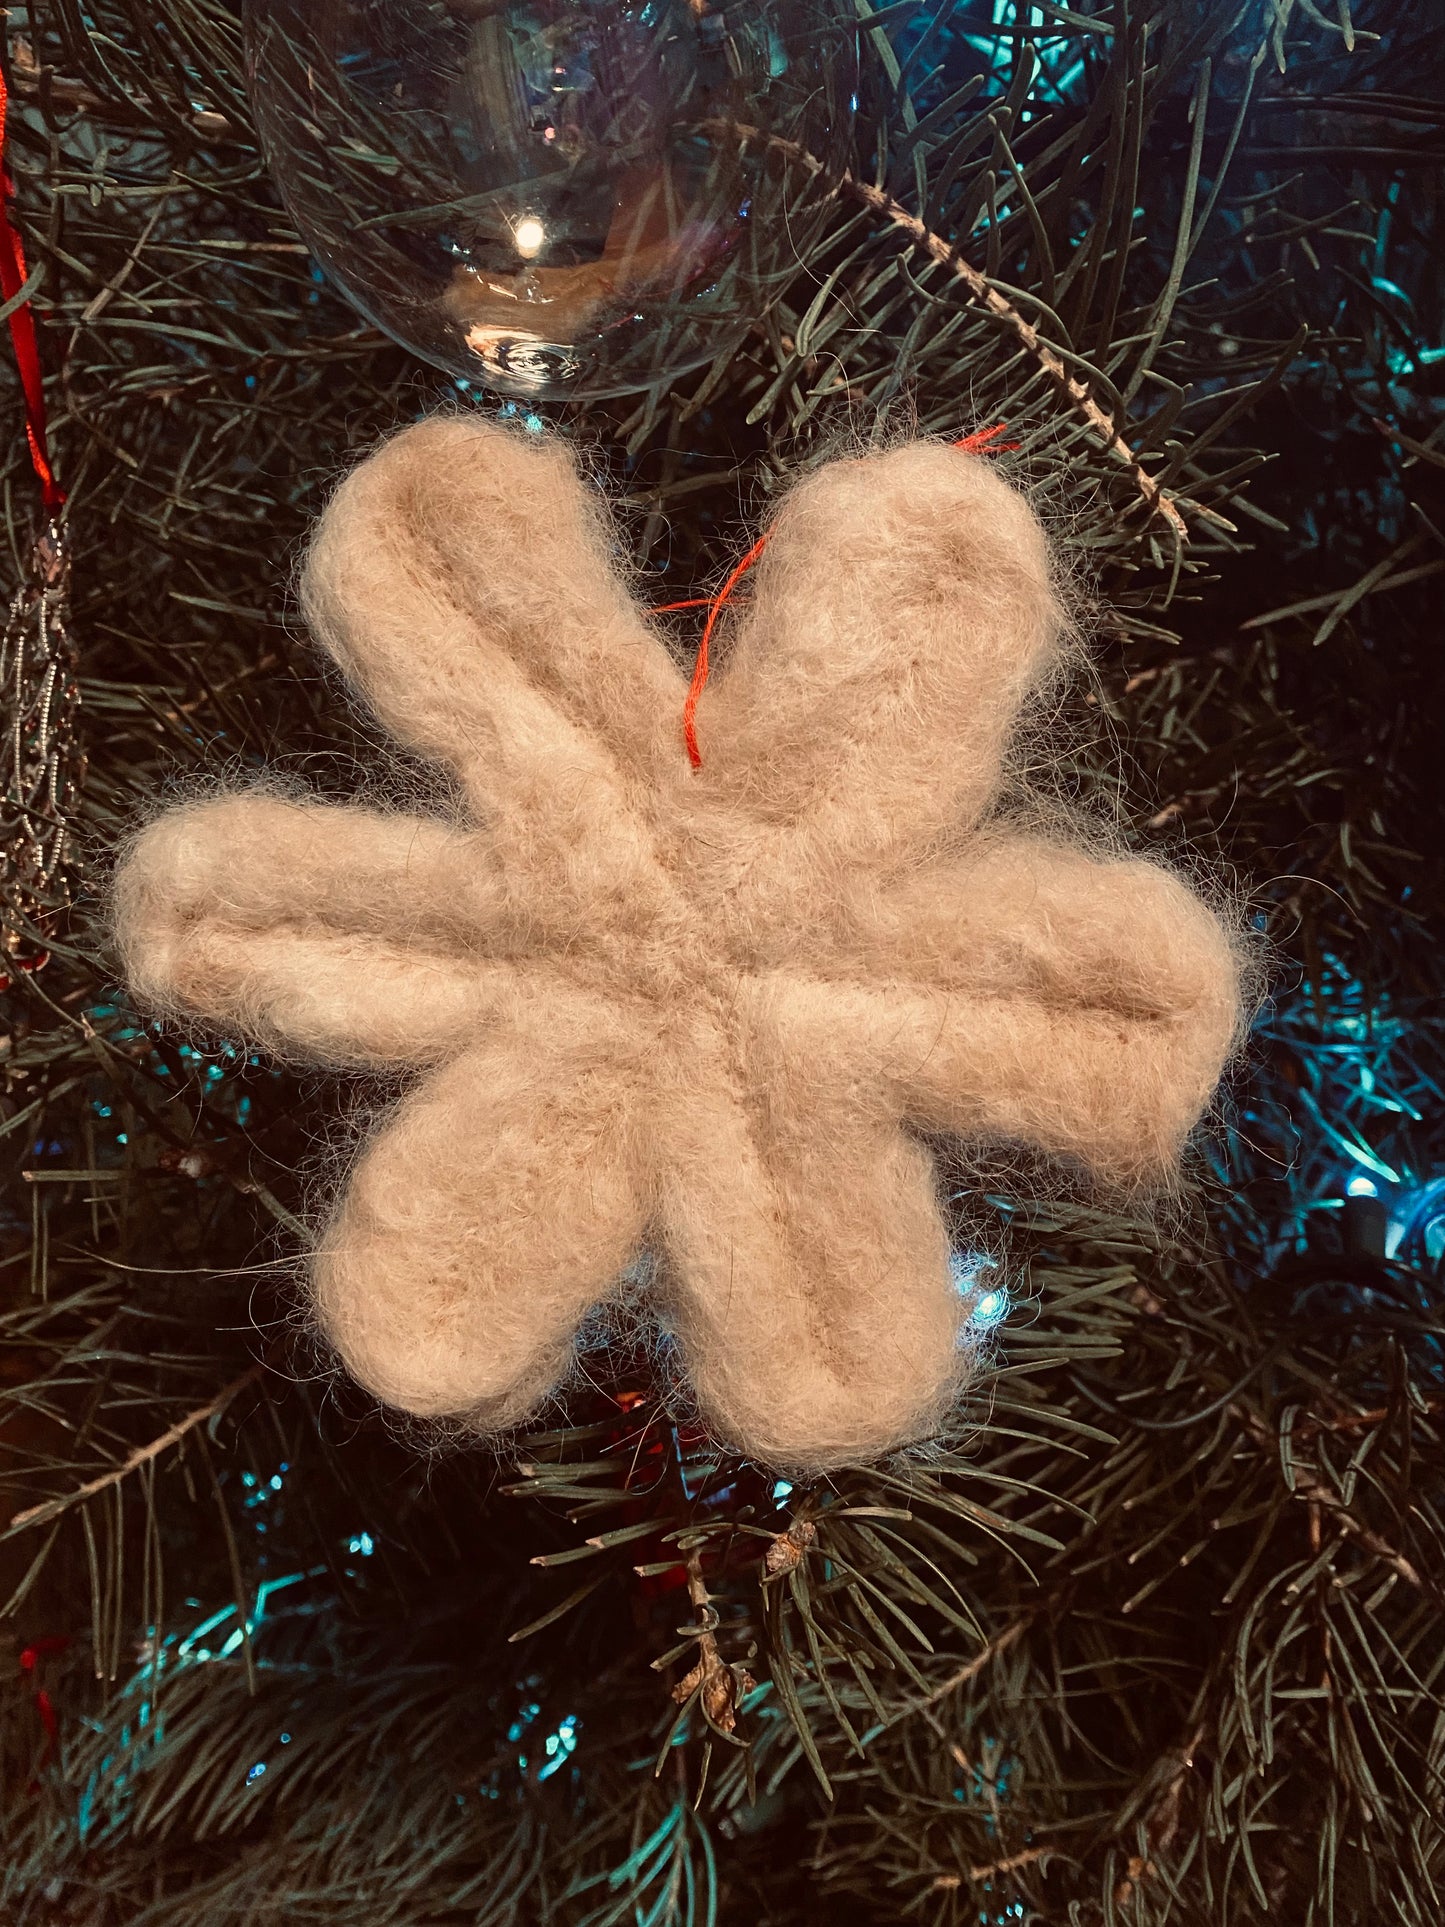 Needle Felt an Ornament with Your Pet's Fur!